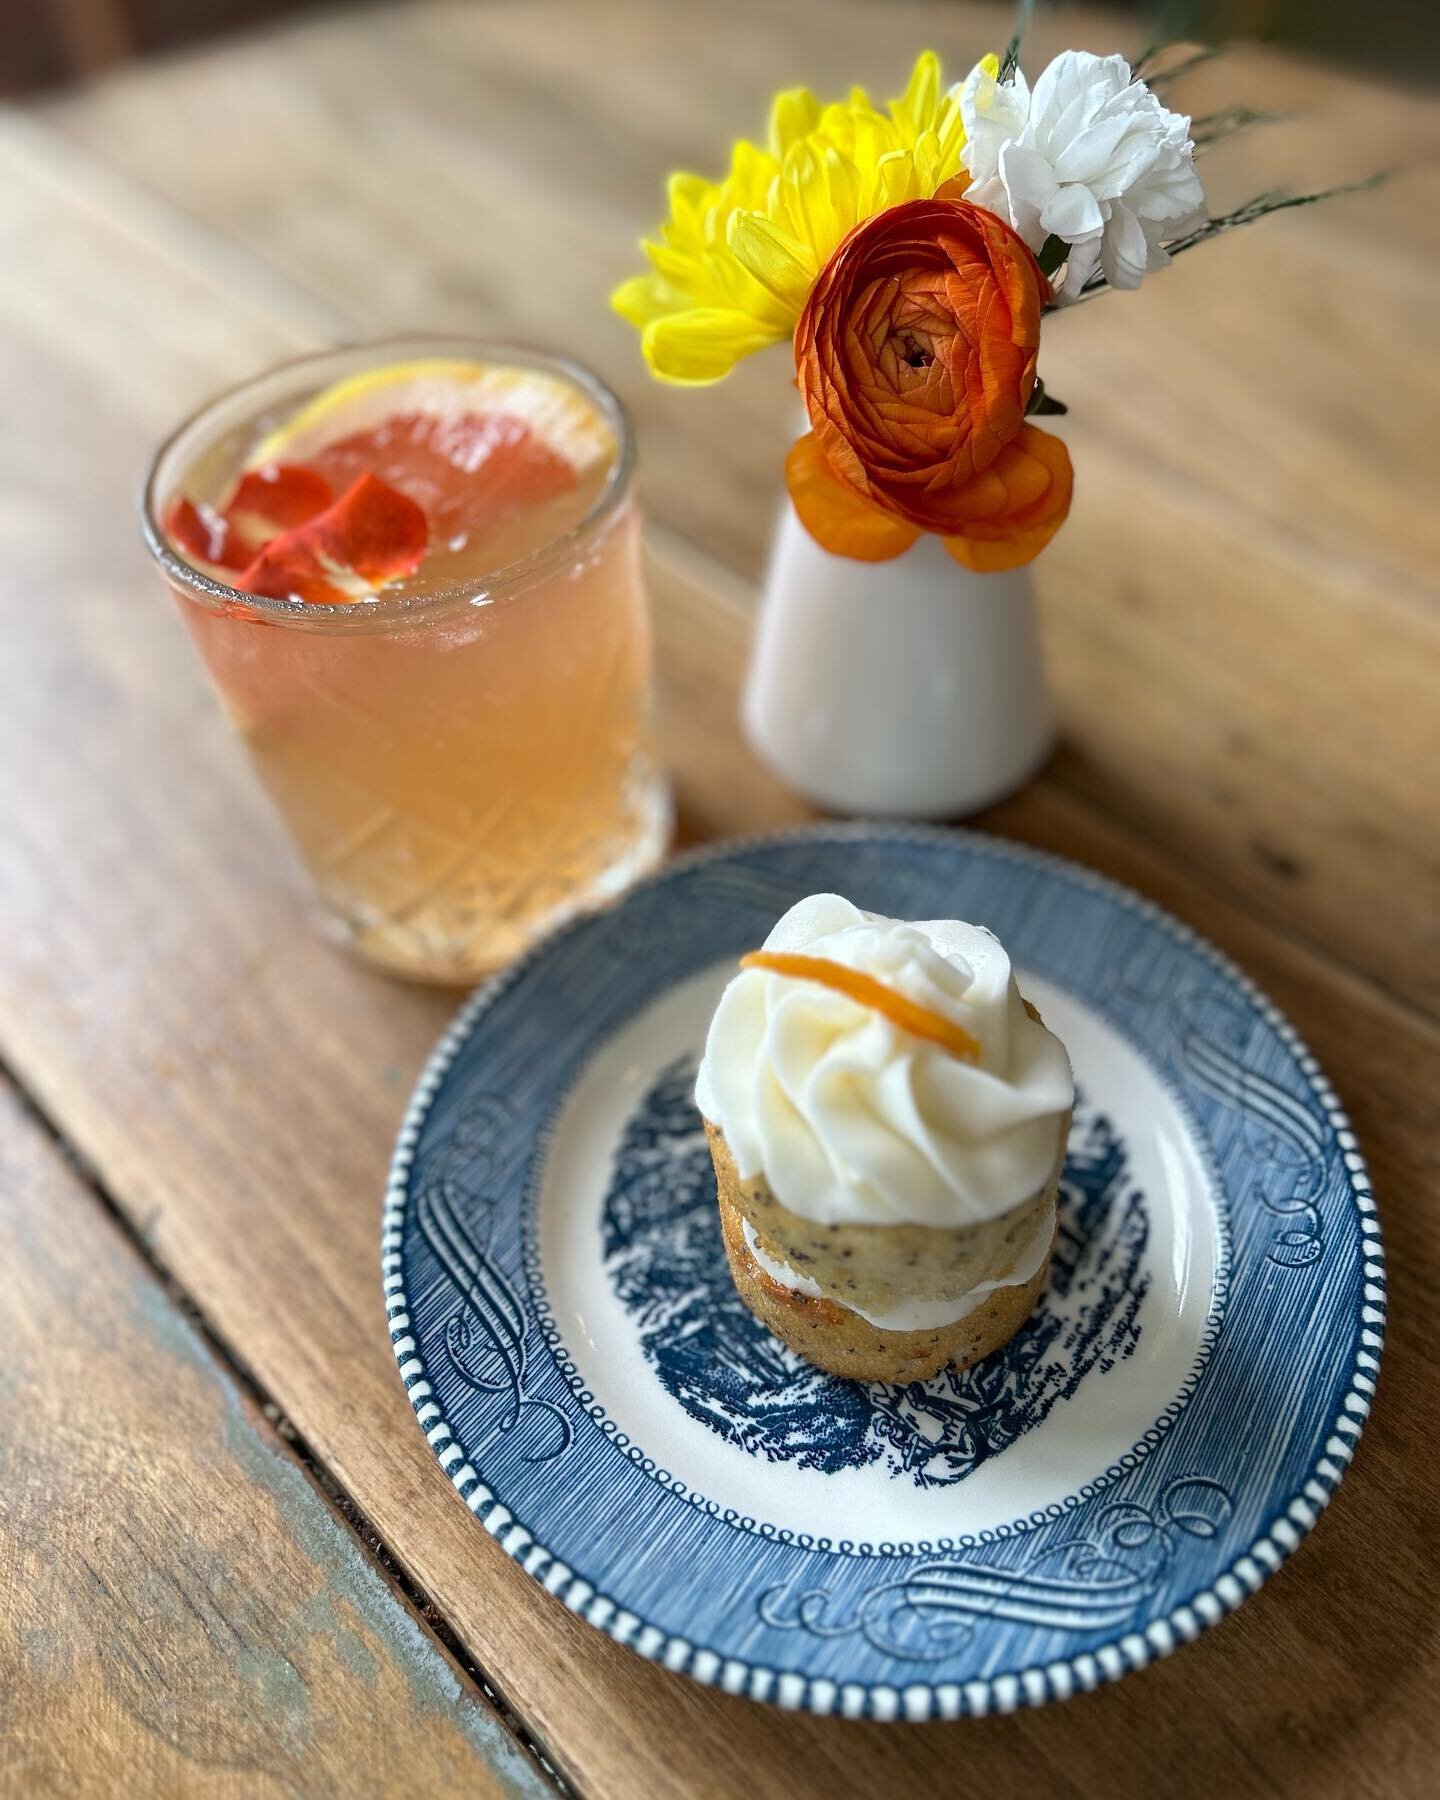 Mother&rsquo;s Day is coming! Bring mama in for an orange poppyseed mini cake and a grapefruit rose paloma! And maybe a crepe too ☺️